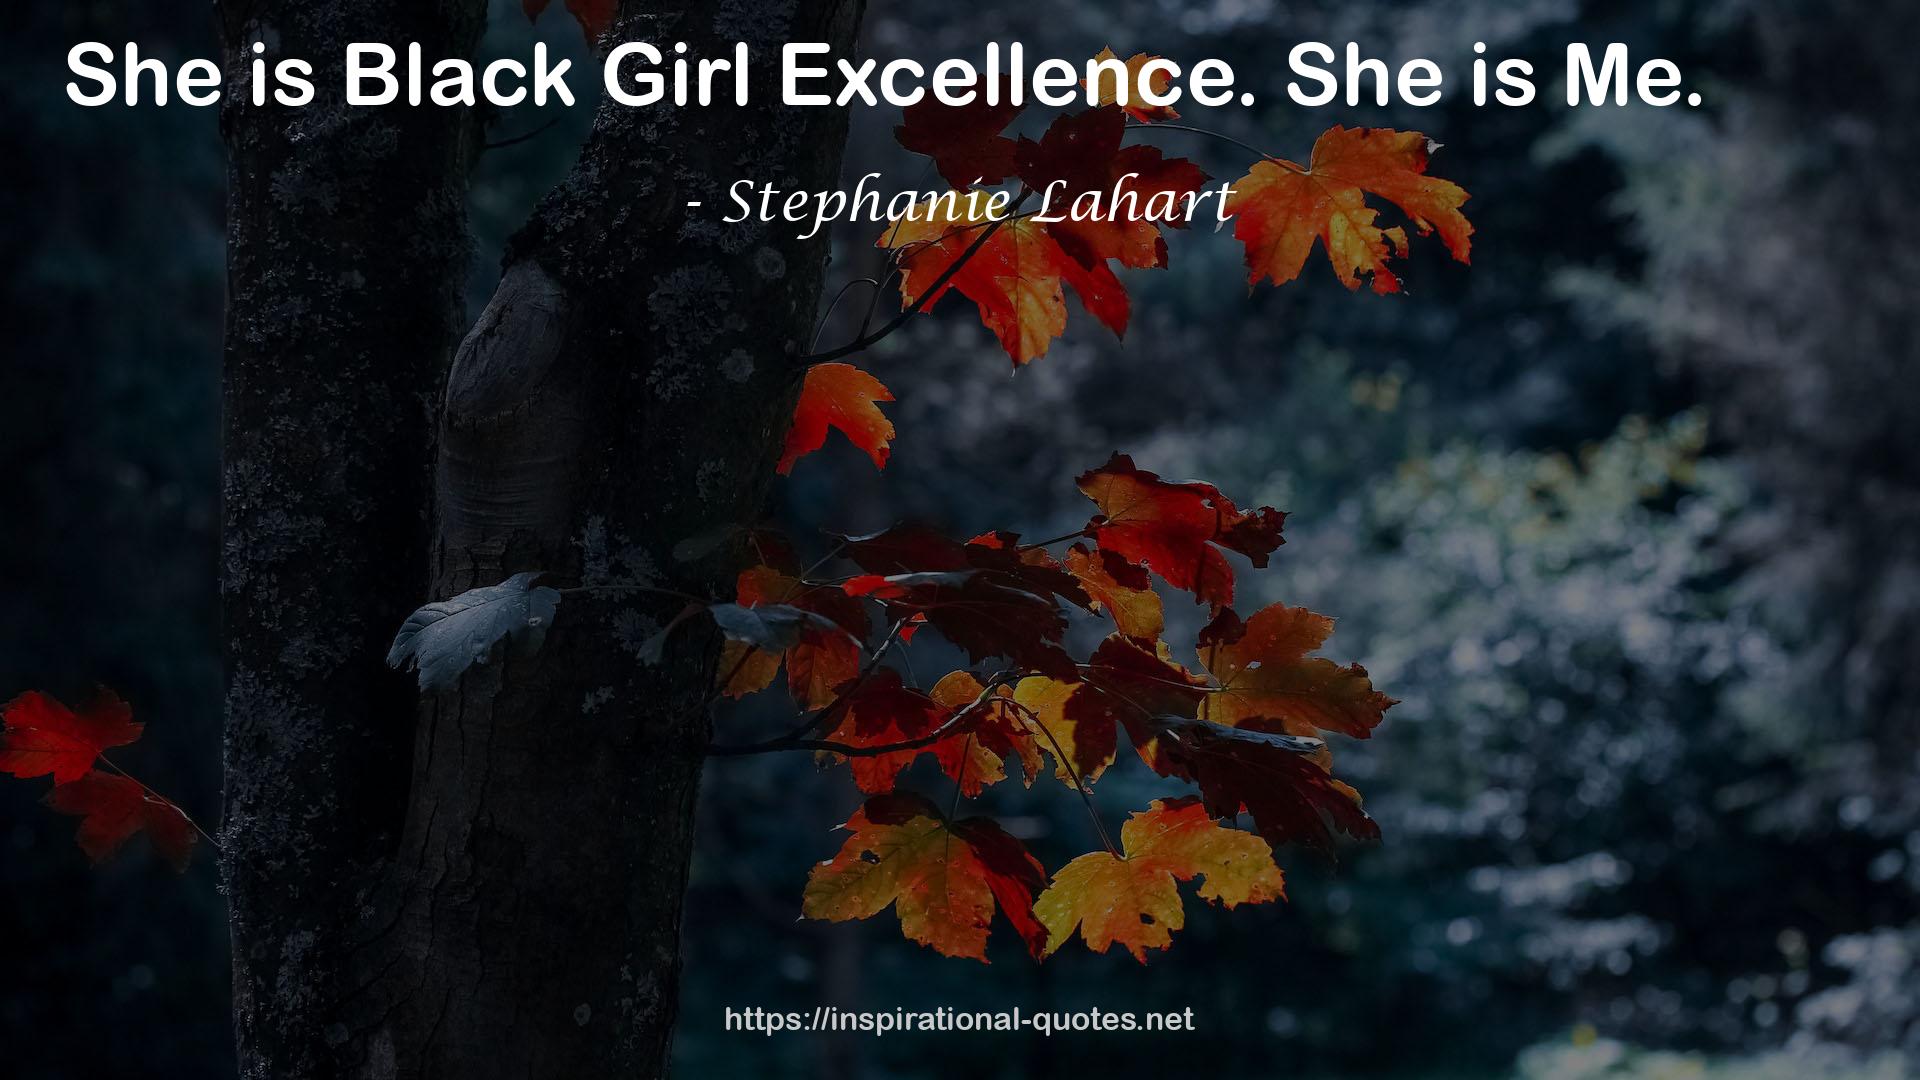 Stephanie Lahart quote : She is Black Girl Excellence. She is Me.